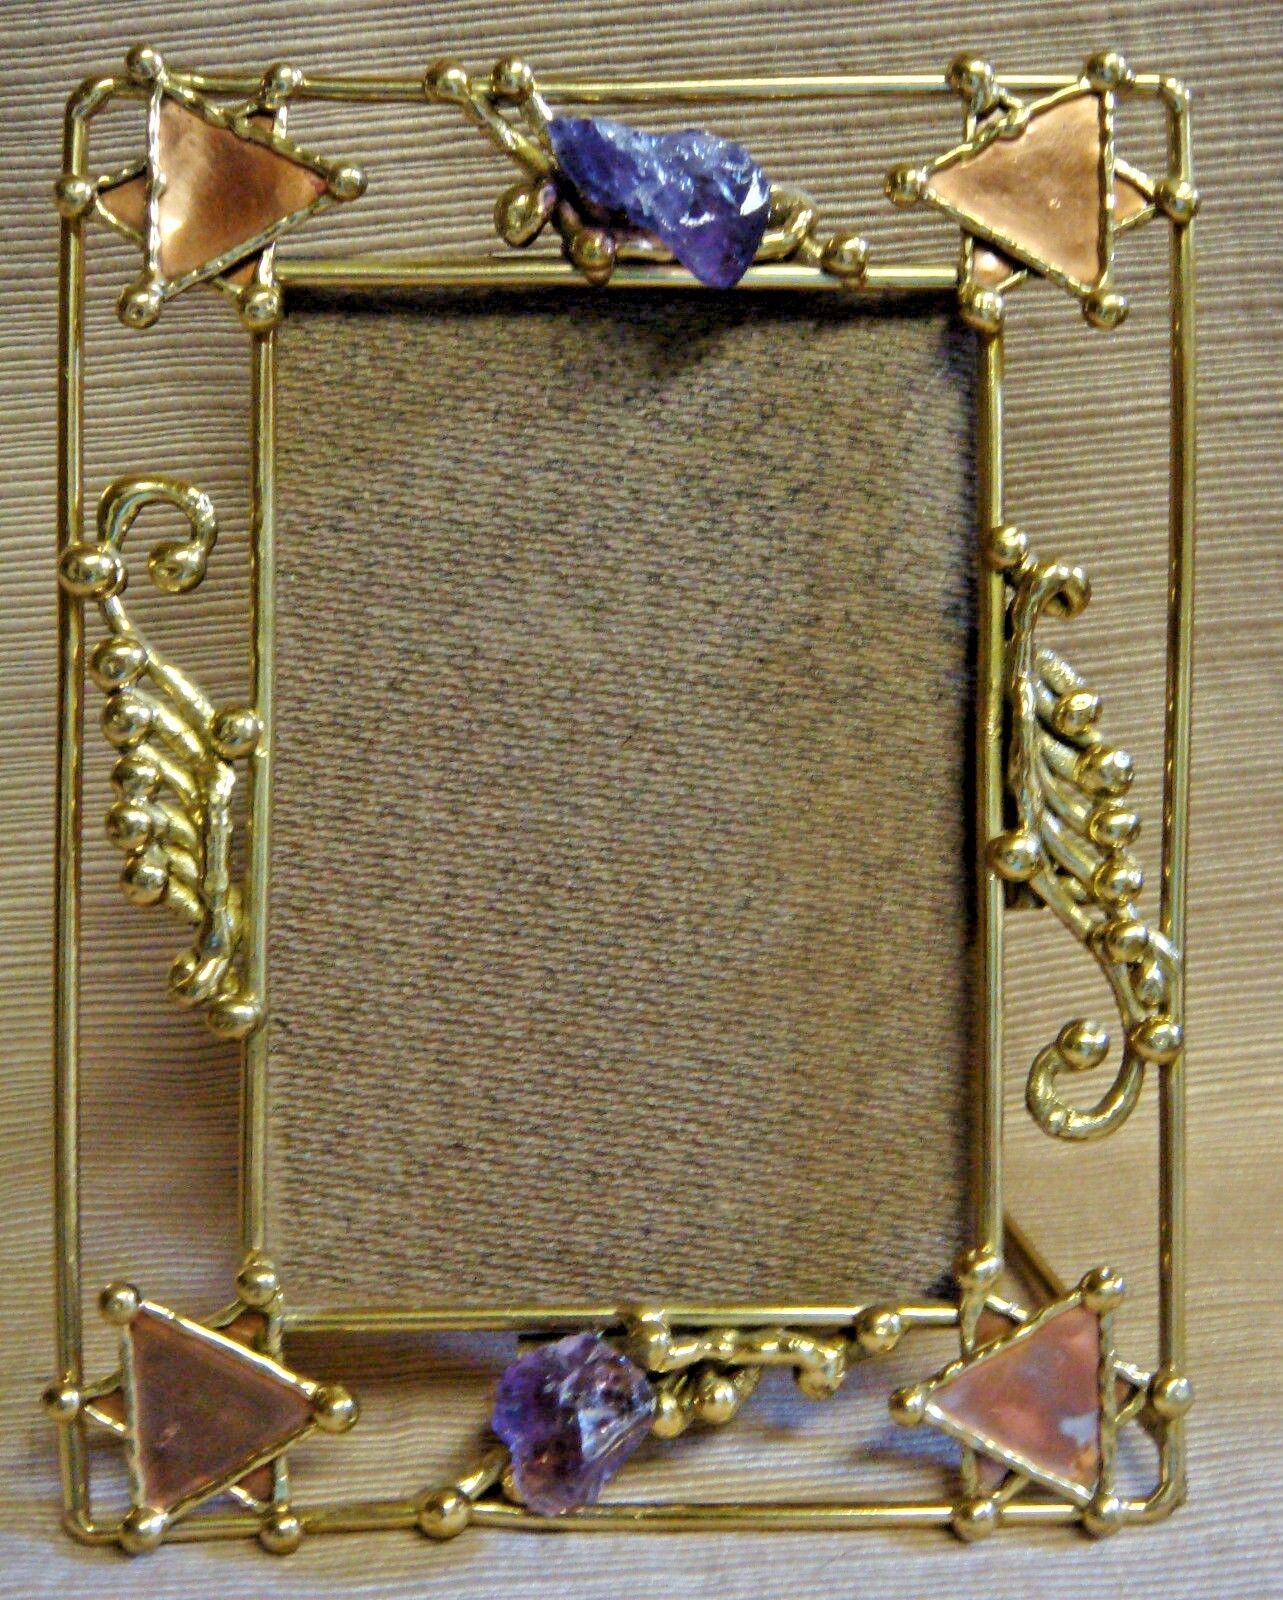 HEBREW JEWISH Handcrafted Two-Tone Metal Frame - Amythists Star of David